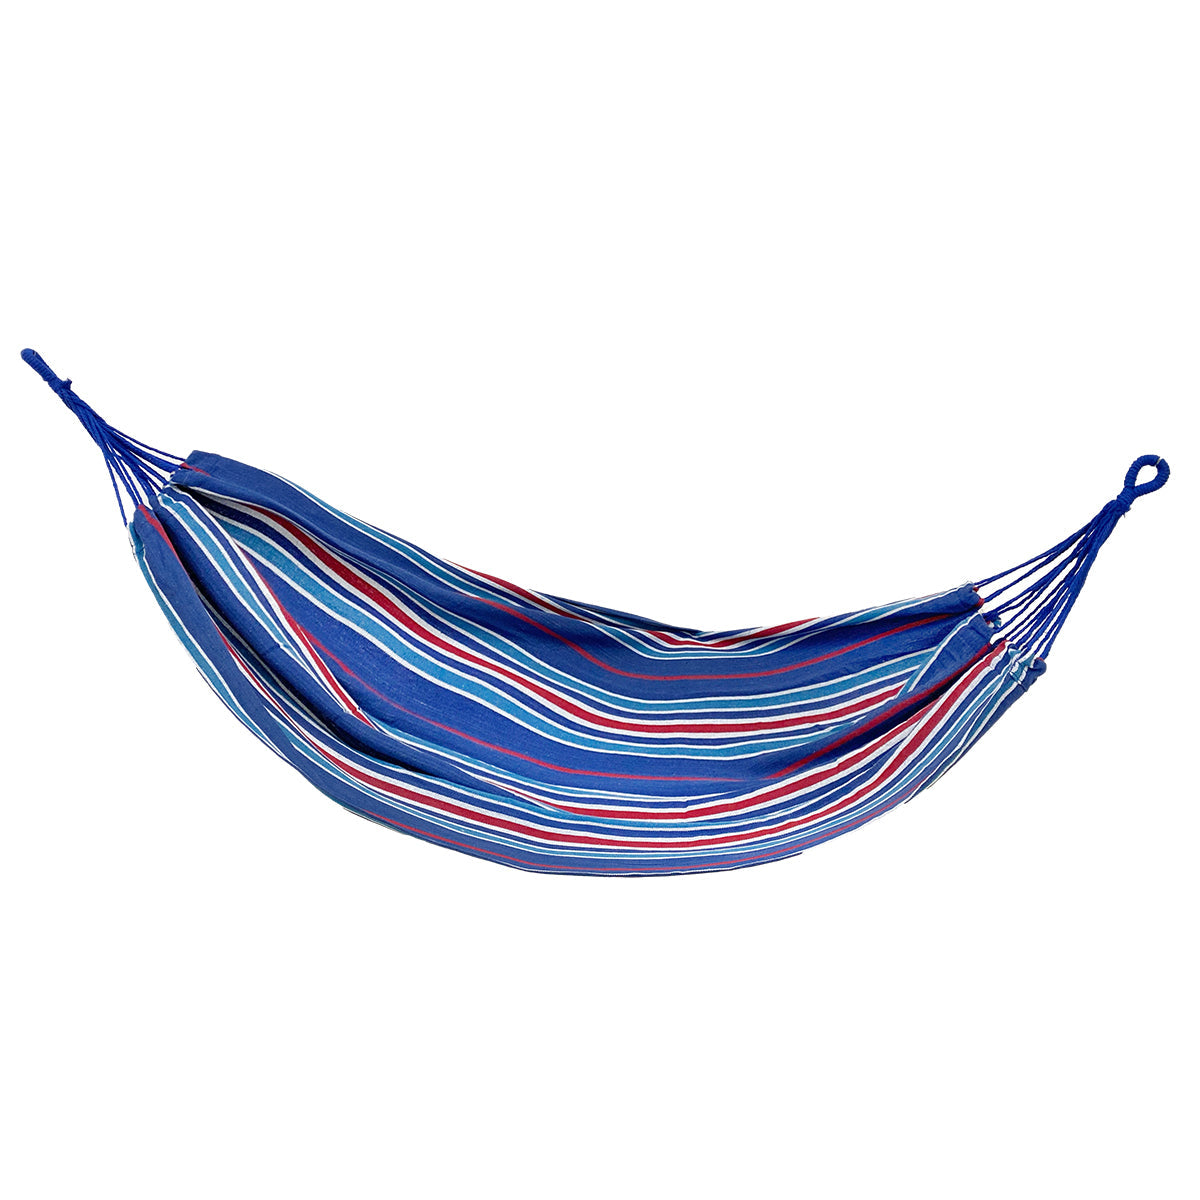 TRAVEL HAMMOCK WITH CANVAS CARRY BAG 200 X 150CM